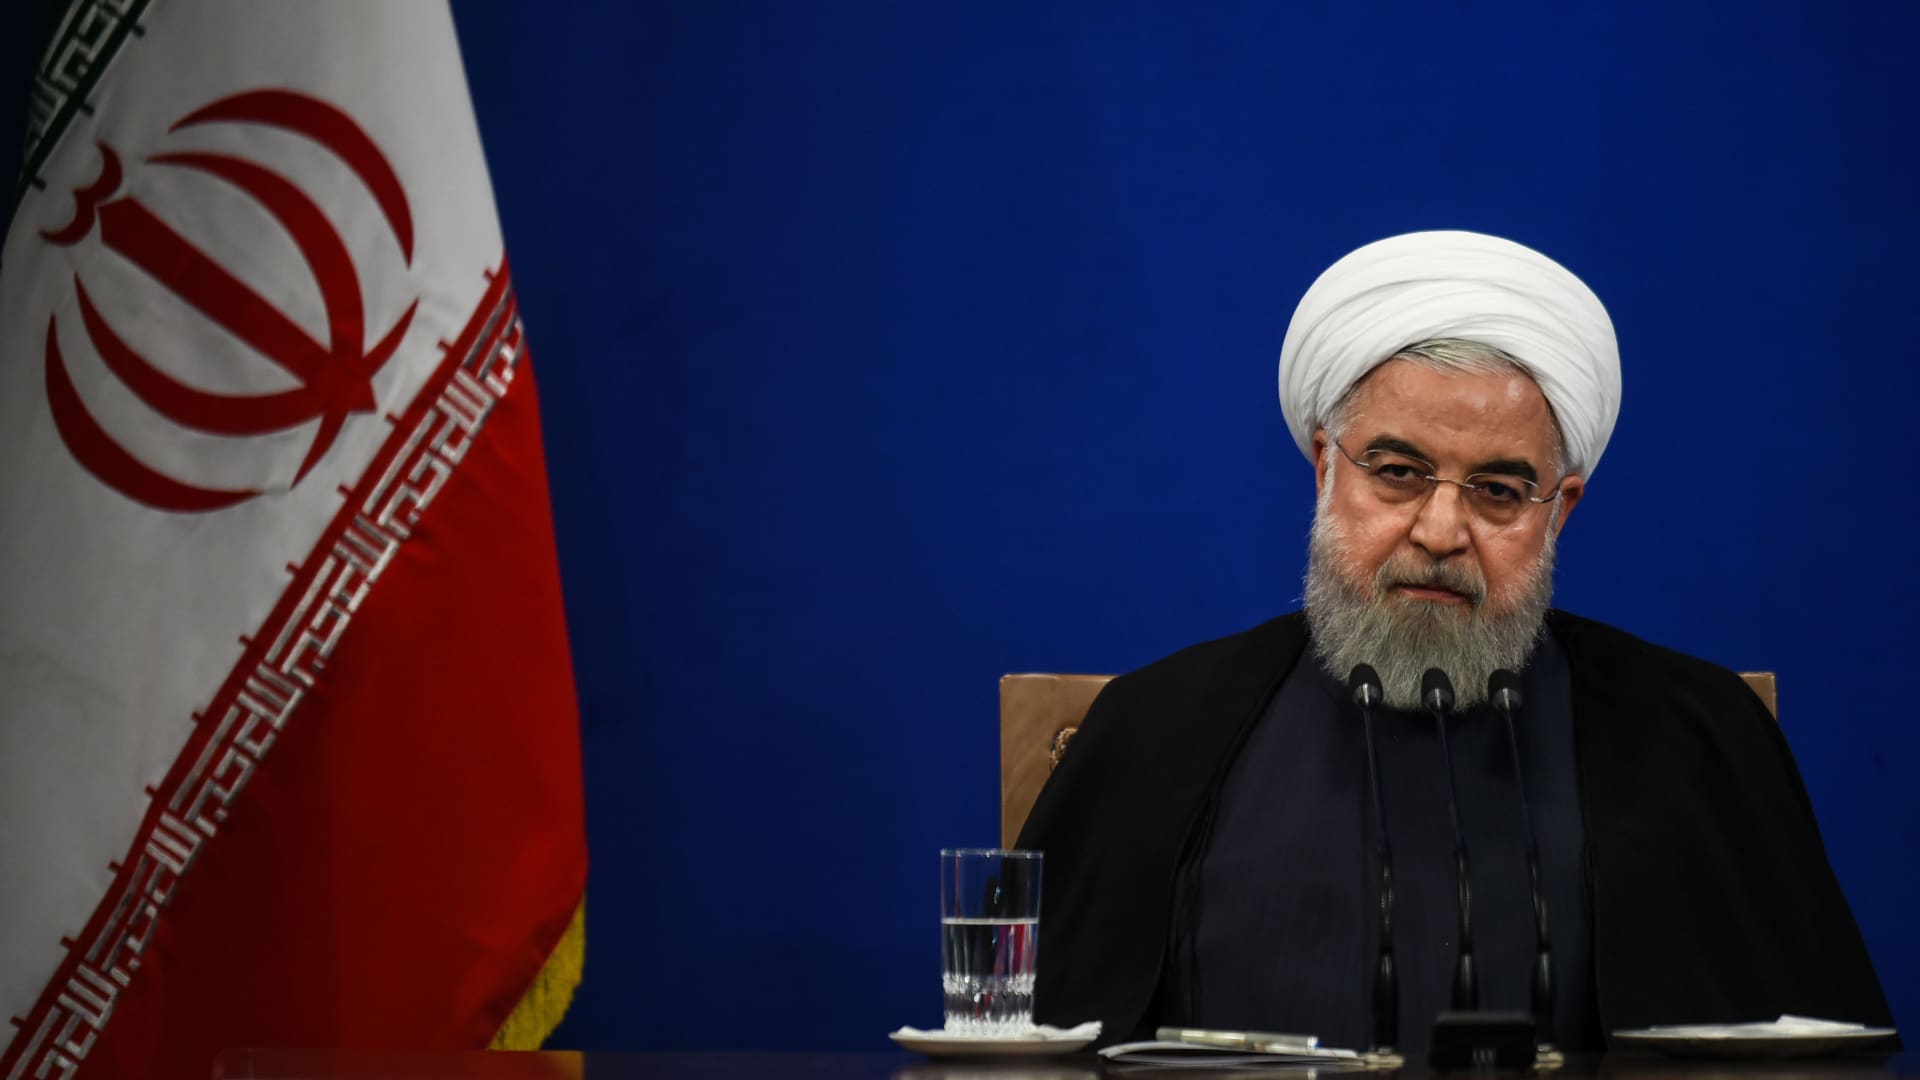 Hassan Rouhani, Iran's president, pauses whilst speaking during a news conference in Tehran, Iran, on Monday, Oct. 14, 2019.